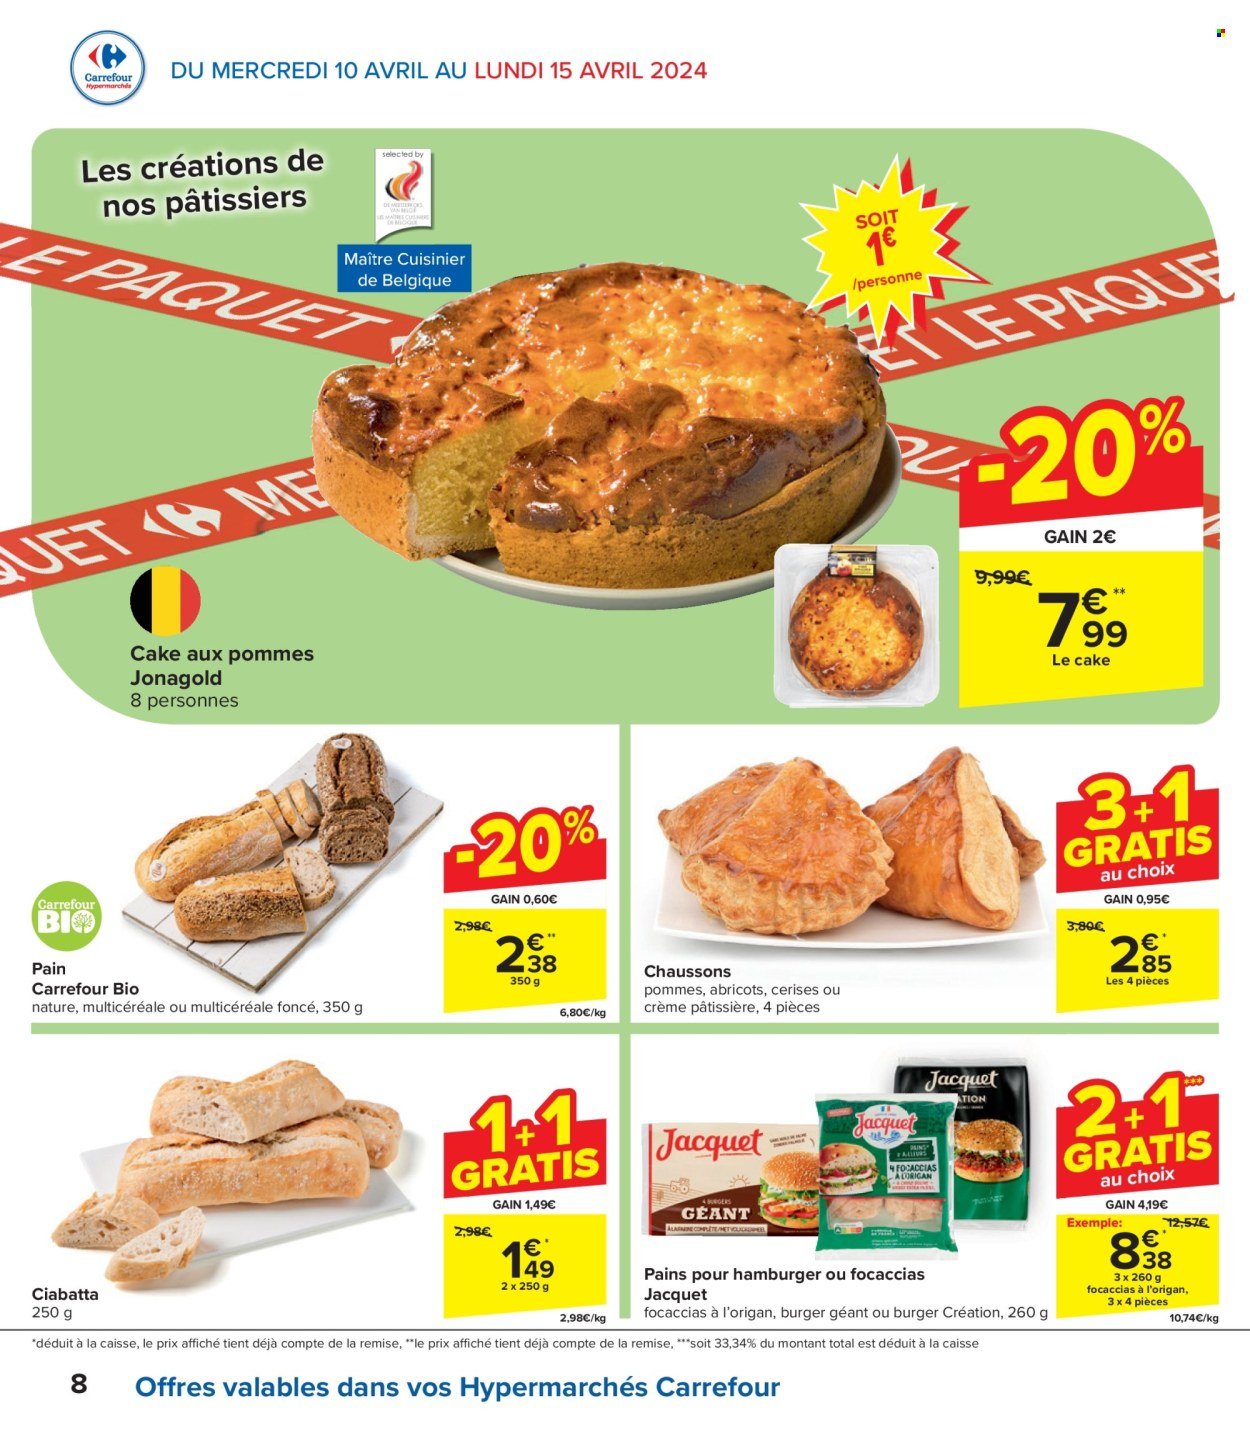 Catalogue Carrefour hypermarkt - 10.4.2024 - 22.4.2024. Page 8.